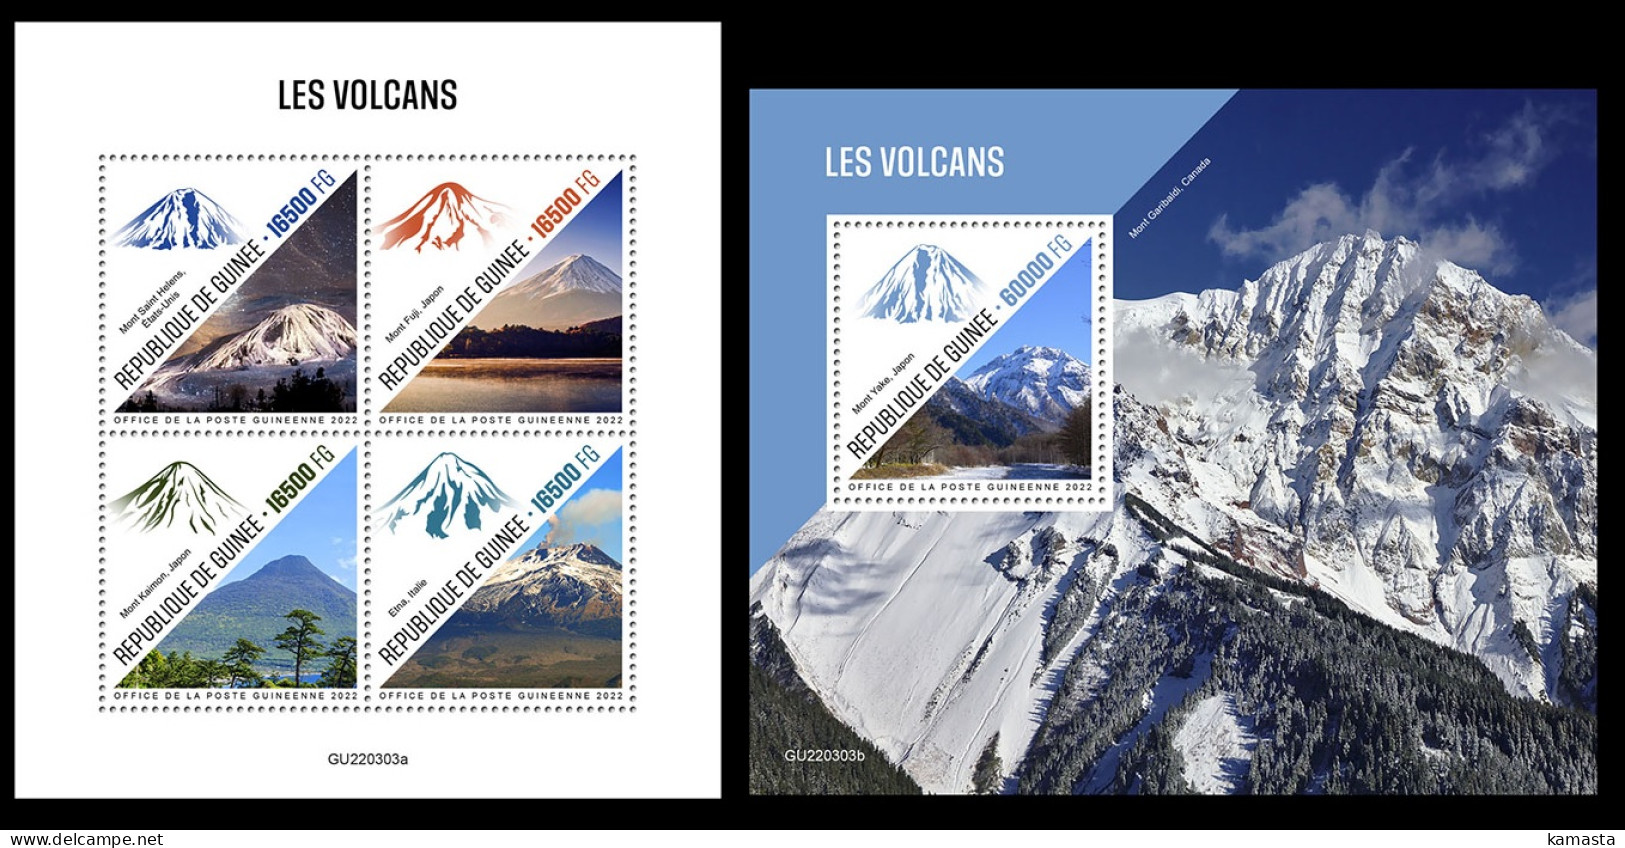 Guinea  2022 Volcanoes. (303) OFFICIAL ISSUE - Volcans